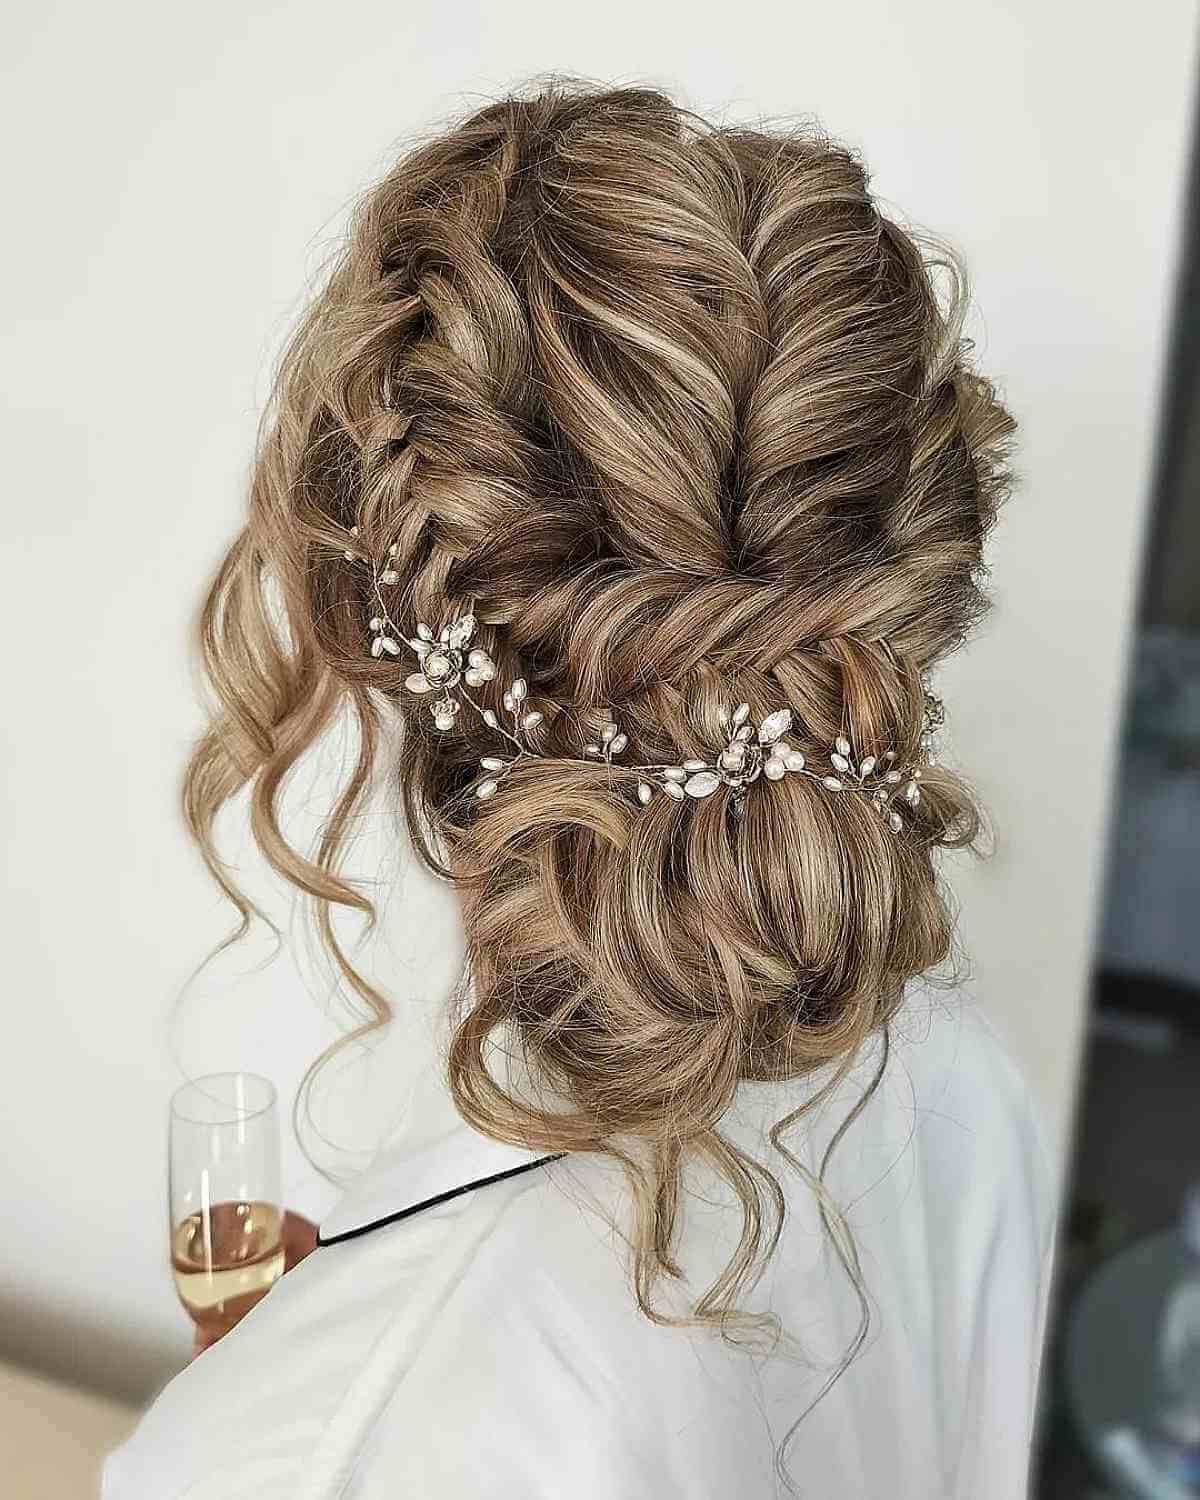 Low braided updo with flower accents